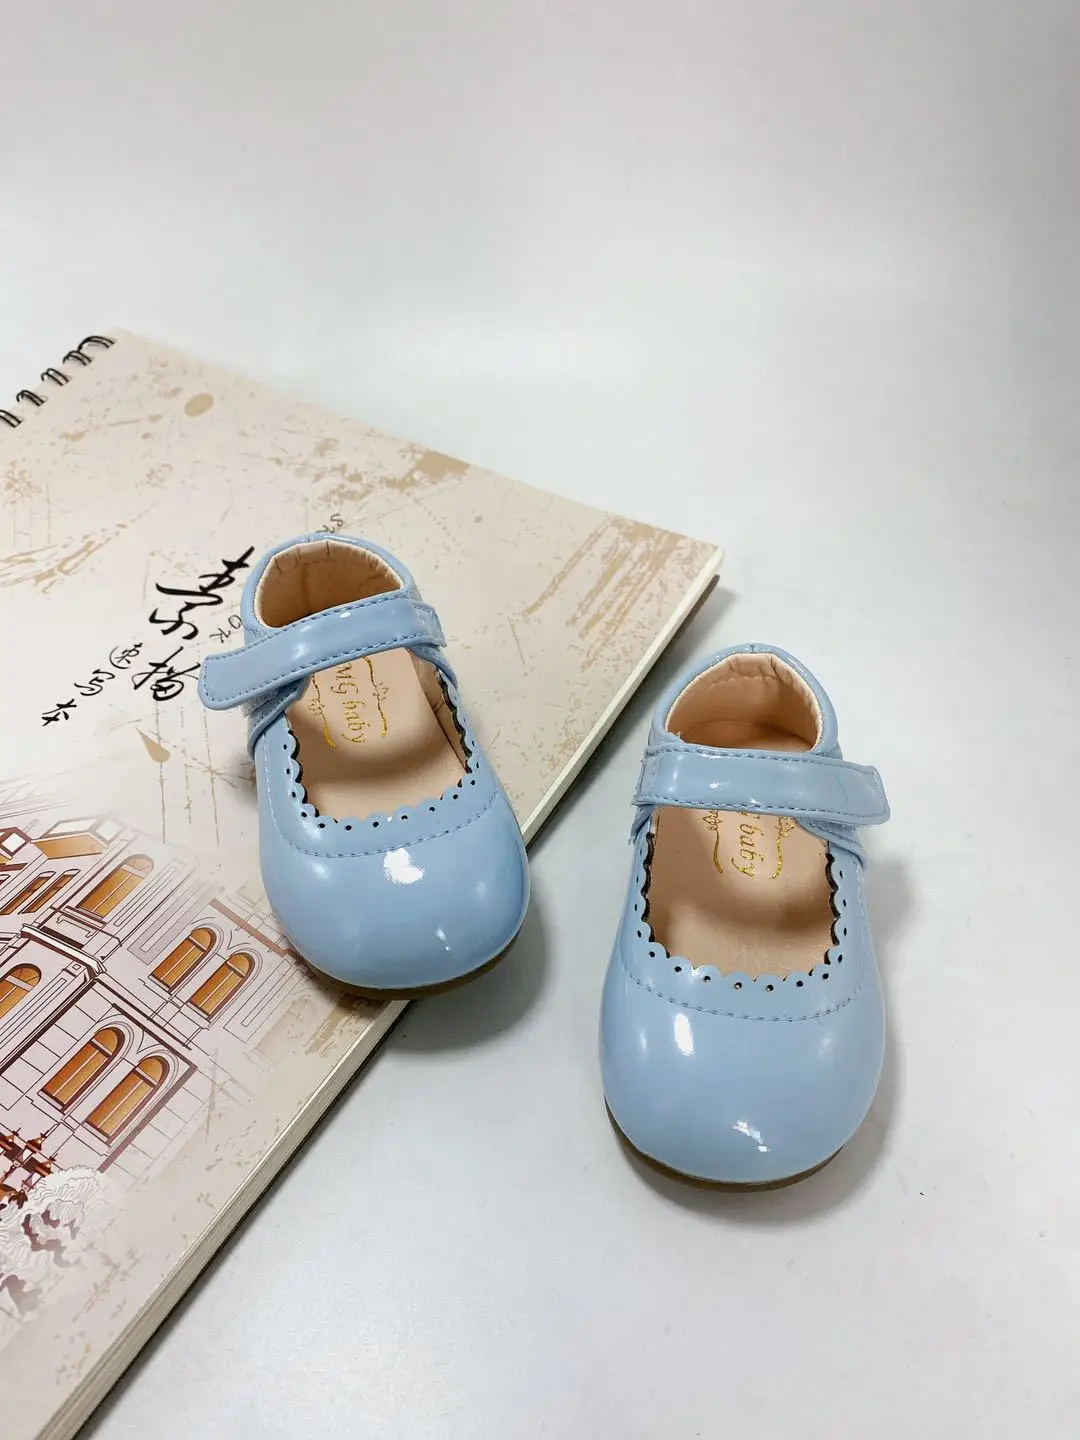 New Summer Cute Bow Princess Shoes Girls Soft Slip-on Baby Shoes Kids Girls Dancing Footwears Breathable Walkers Flats Children enlarge